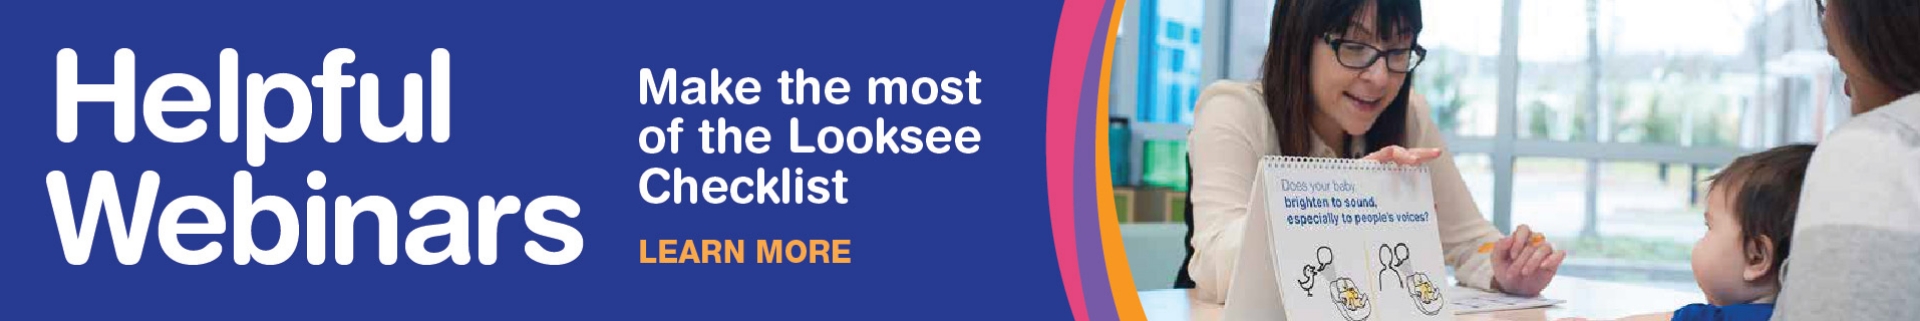 Make the most of the Looksee Checklist. Click on the banner to learn more.